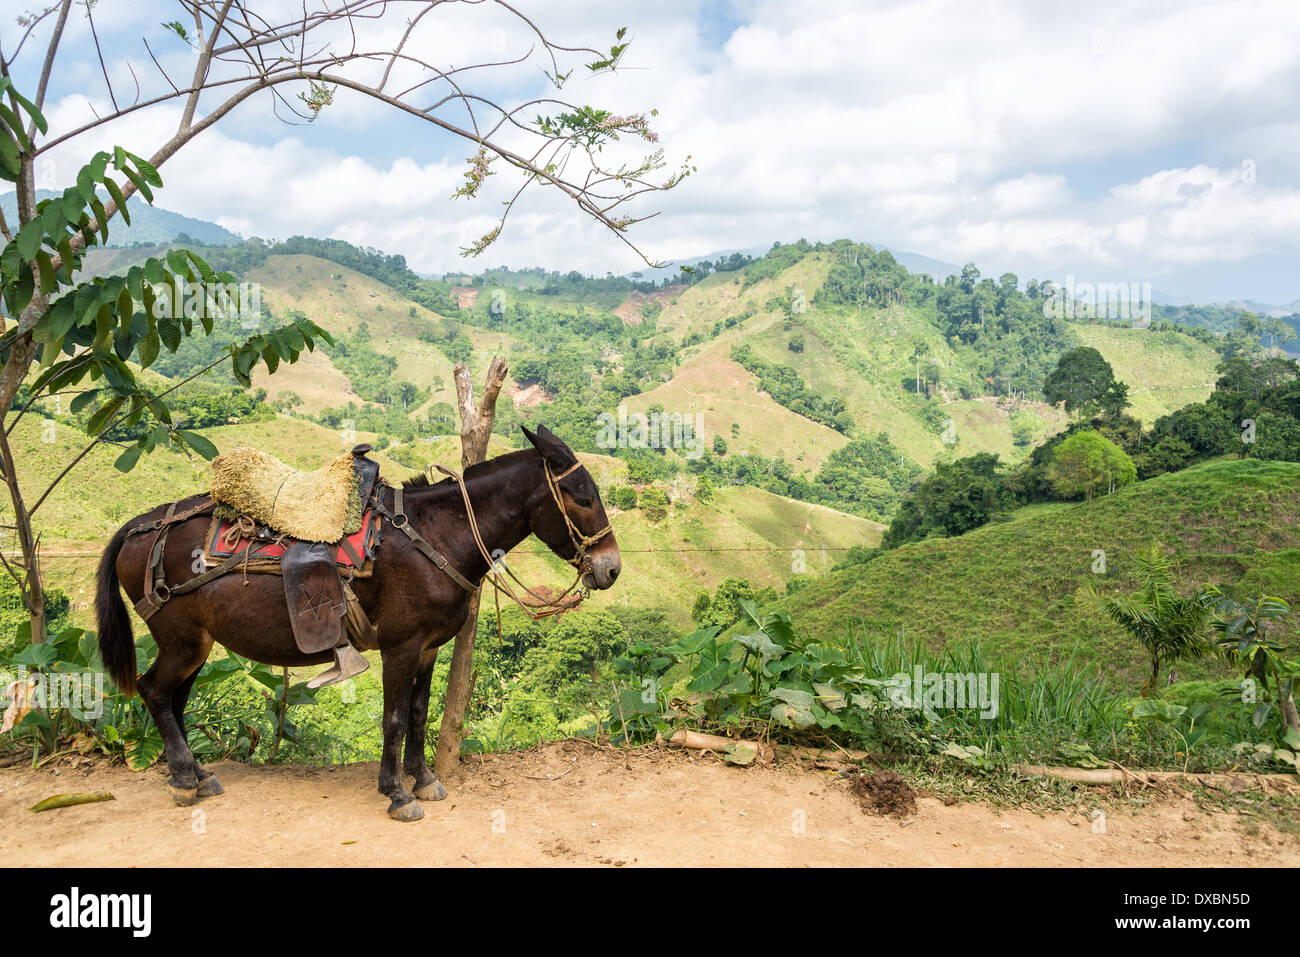 A donkey with lush green hills in the background in rural Colombia Stock Photo